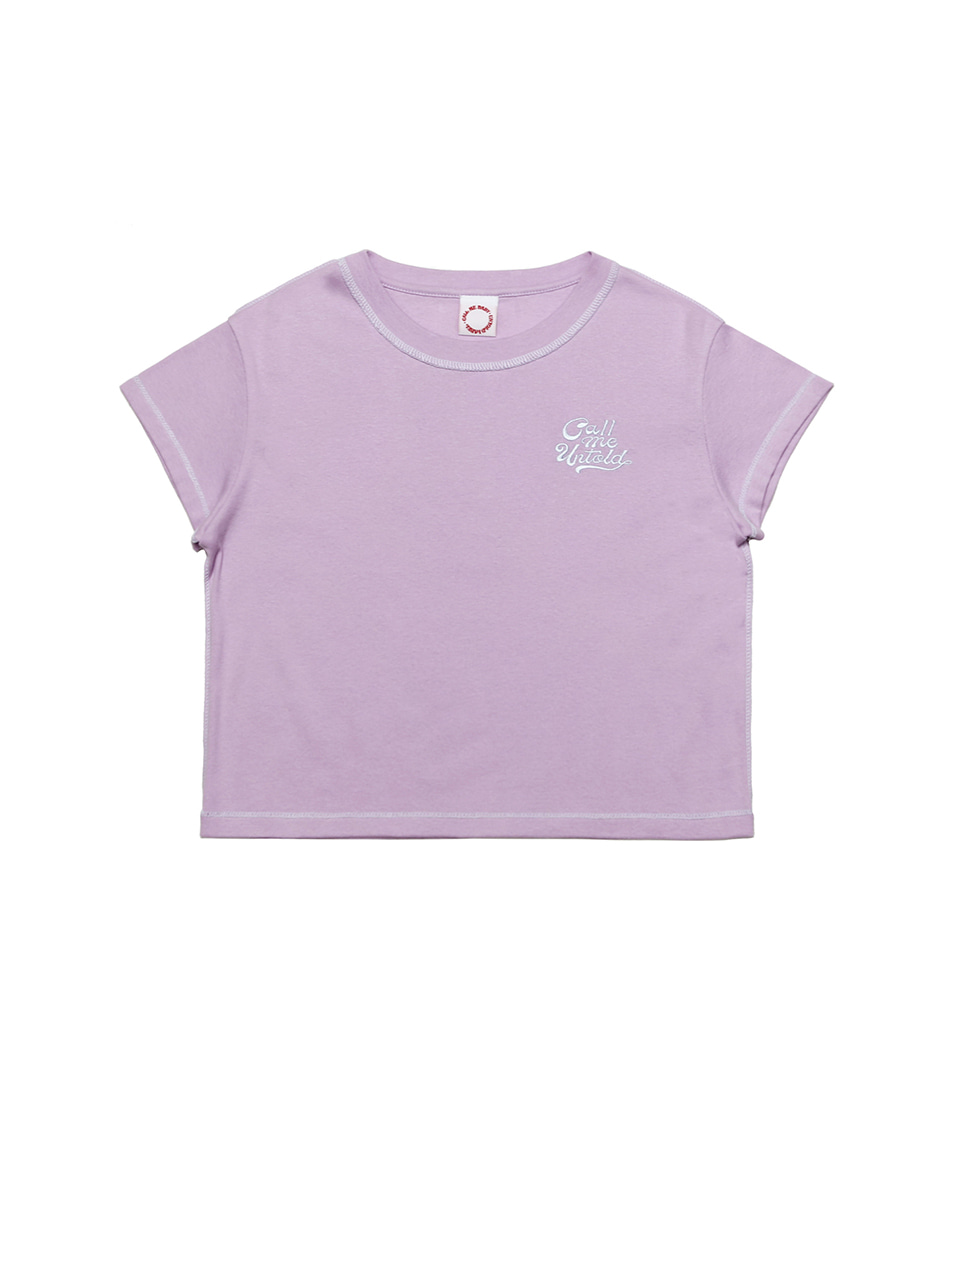 [with Call Me Baby] OVERSTITCH T-SHIRT - VIOLET